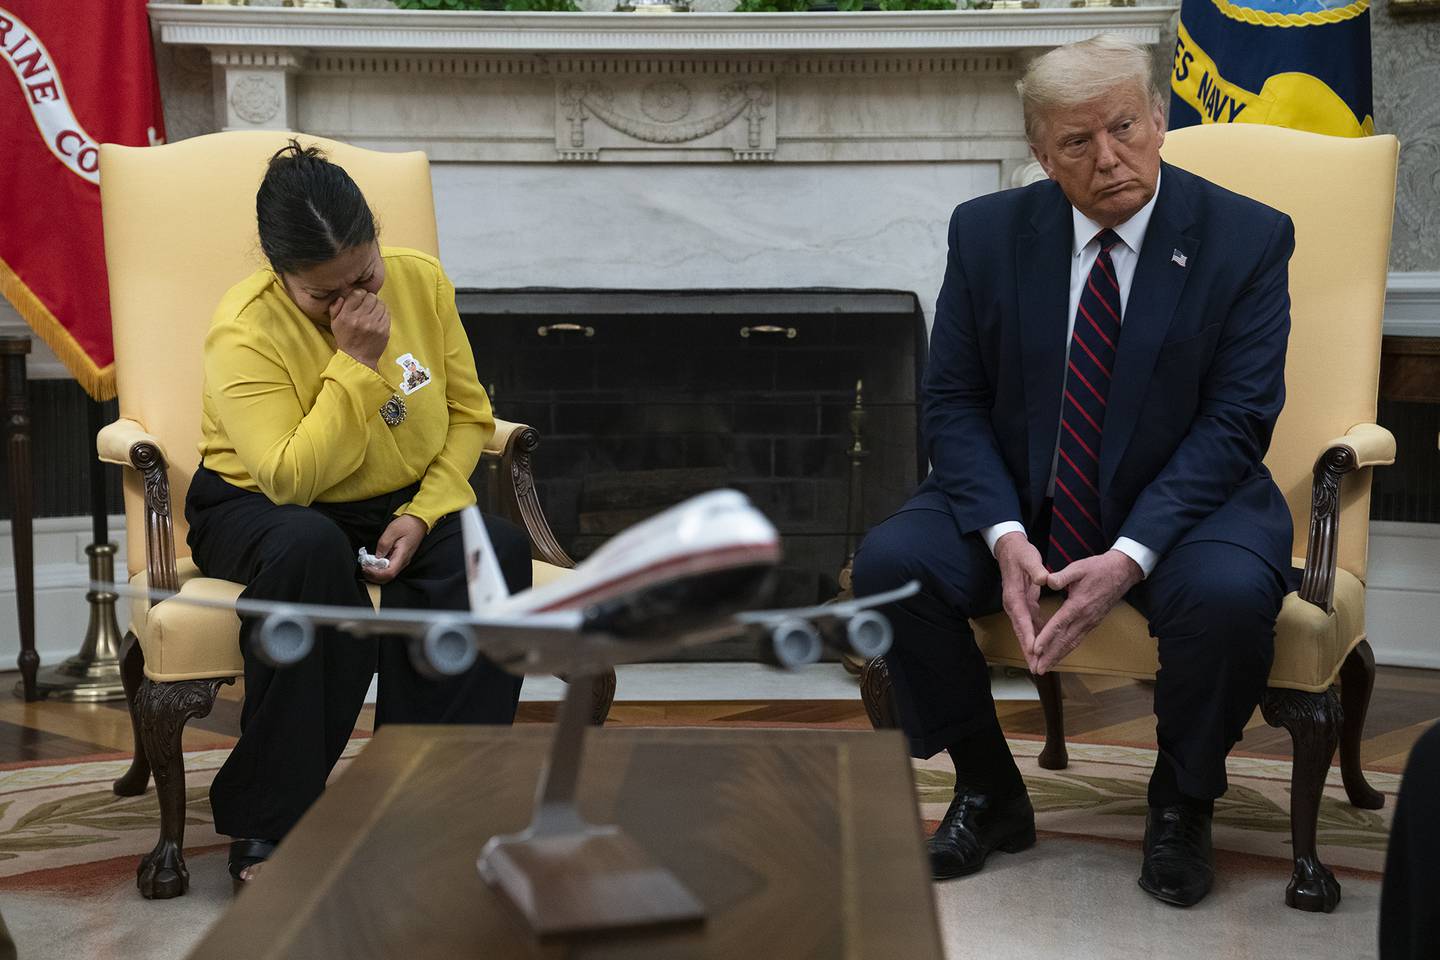 Gloria Guillen, the mother of slain Army Spc. Vanessa Guillen, meets with President Donald Trump in the Oval Office of the White House on Thursday, July 30, 2020, in Washington.